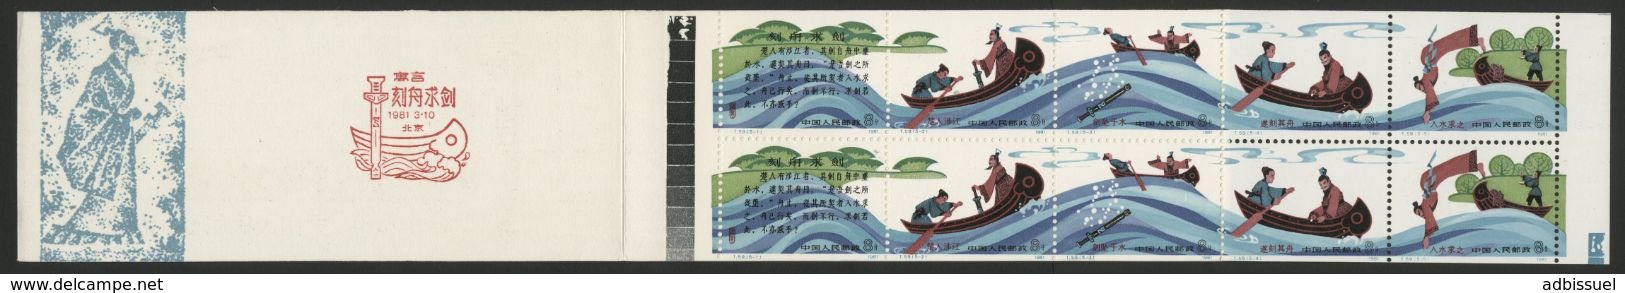 CHINA / CHINE 1981 / Y&T N° 2402 To 2406a (STAMP BOOKLET (CARNET)) ** MNH / Value 60 €. VG/TB. - Nuovi